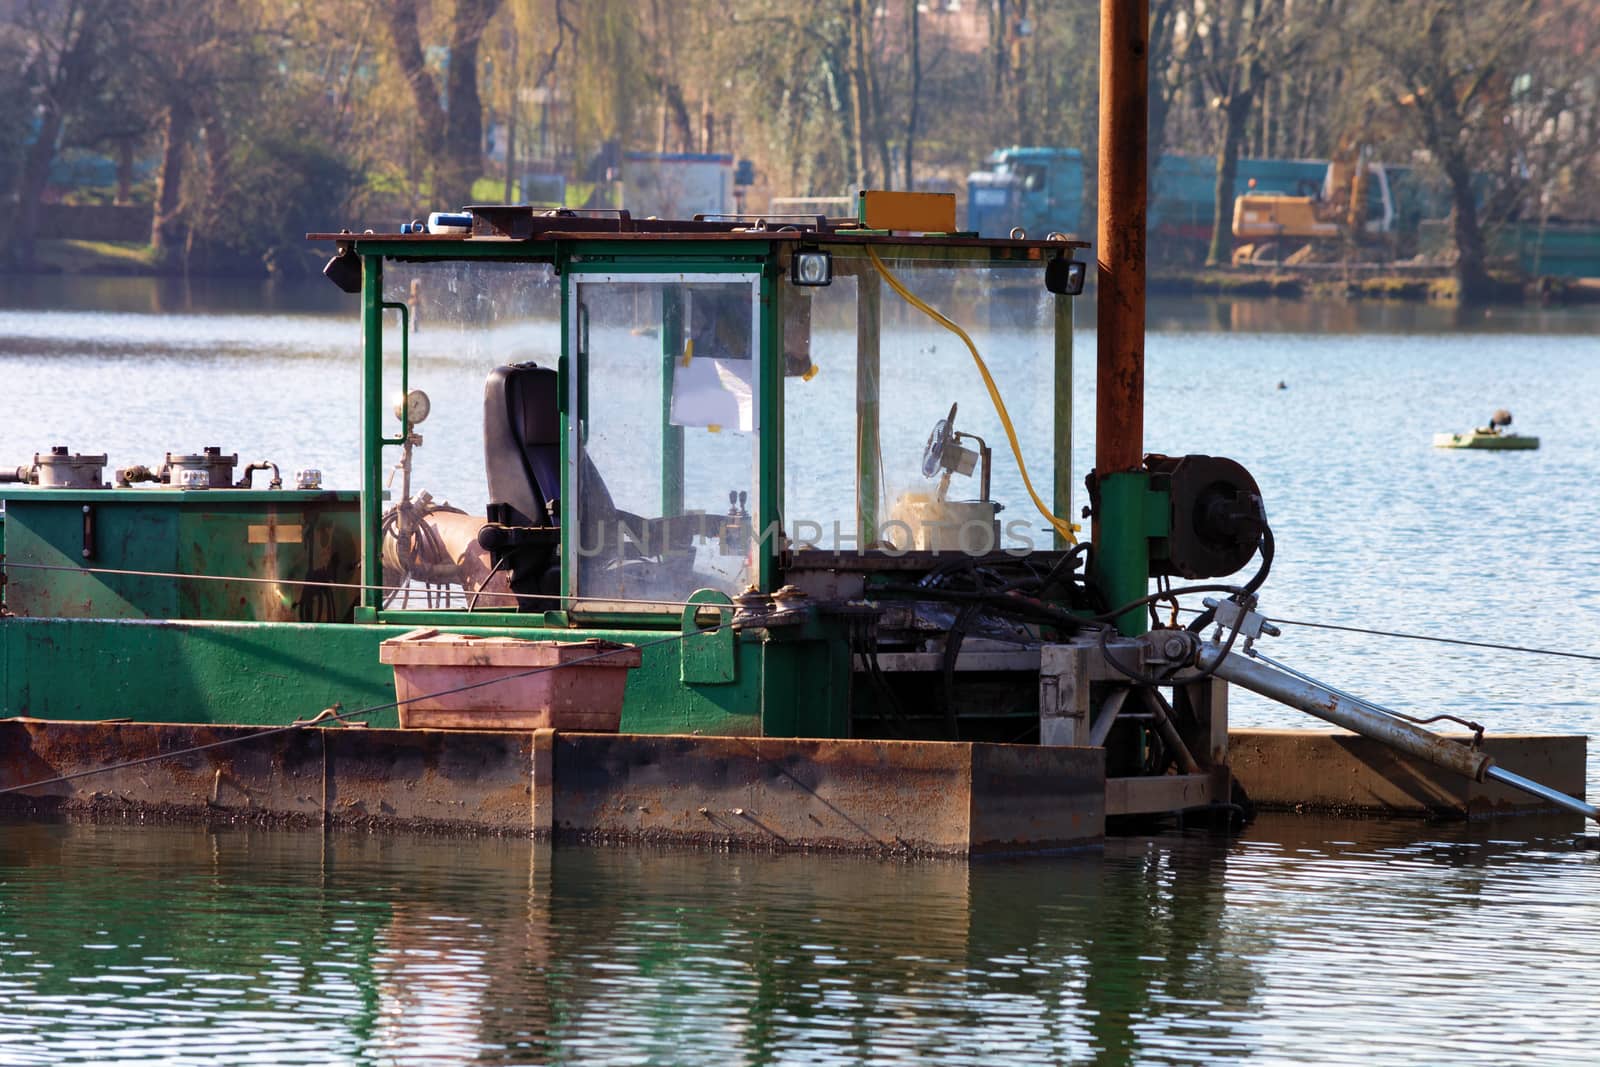 Dredger, Floating excavator when dredging of soil, sand and silt from a river.